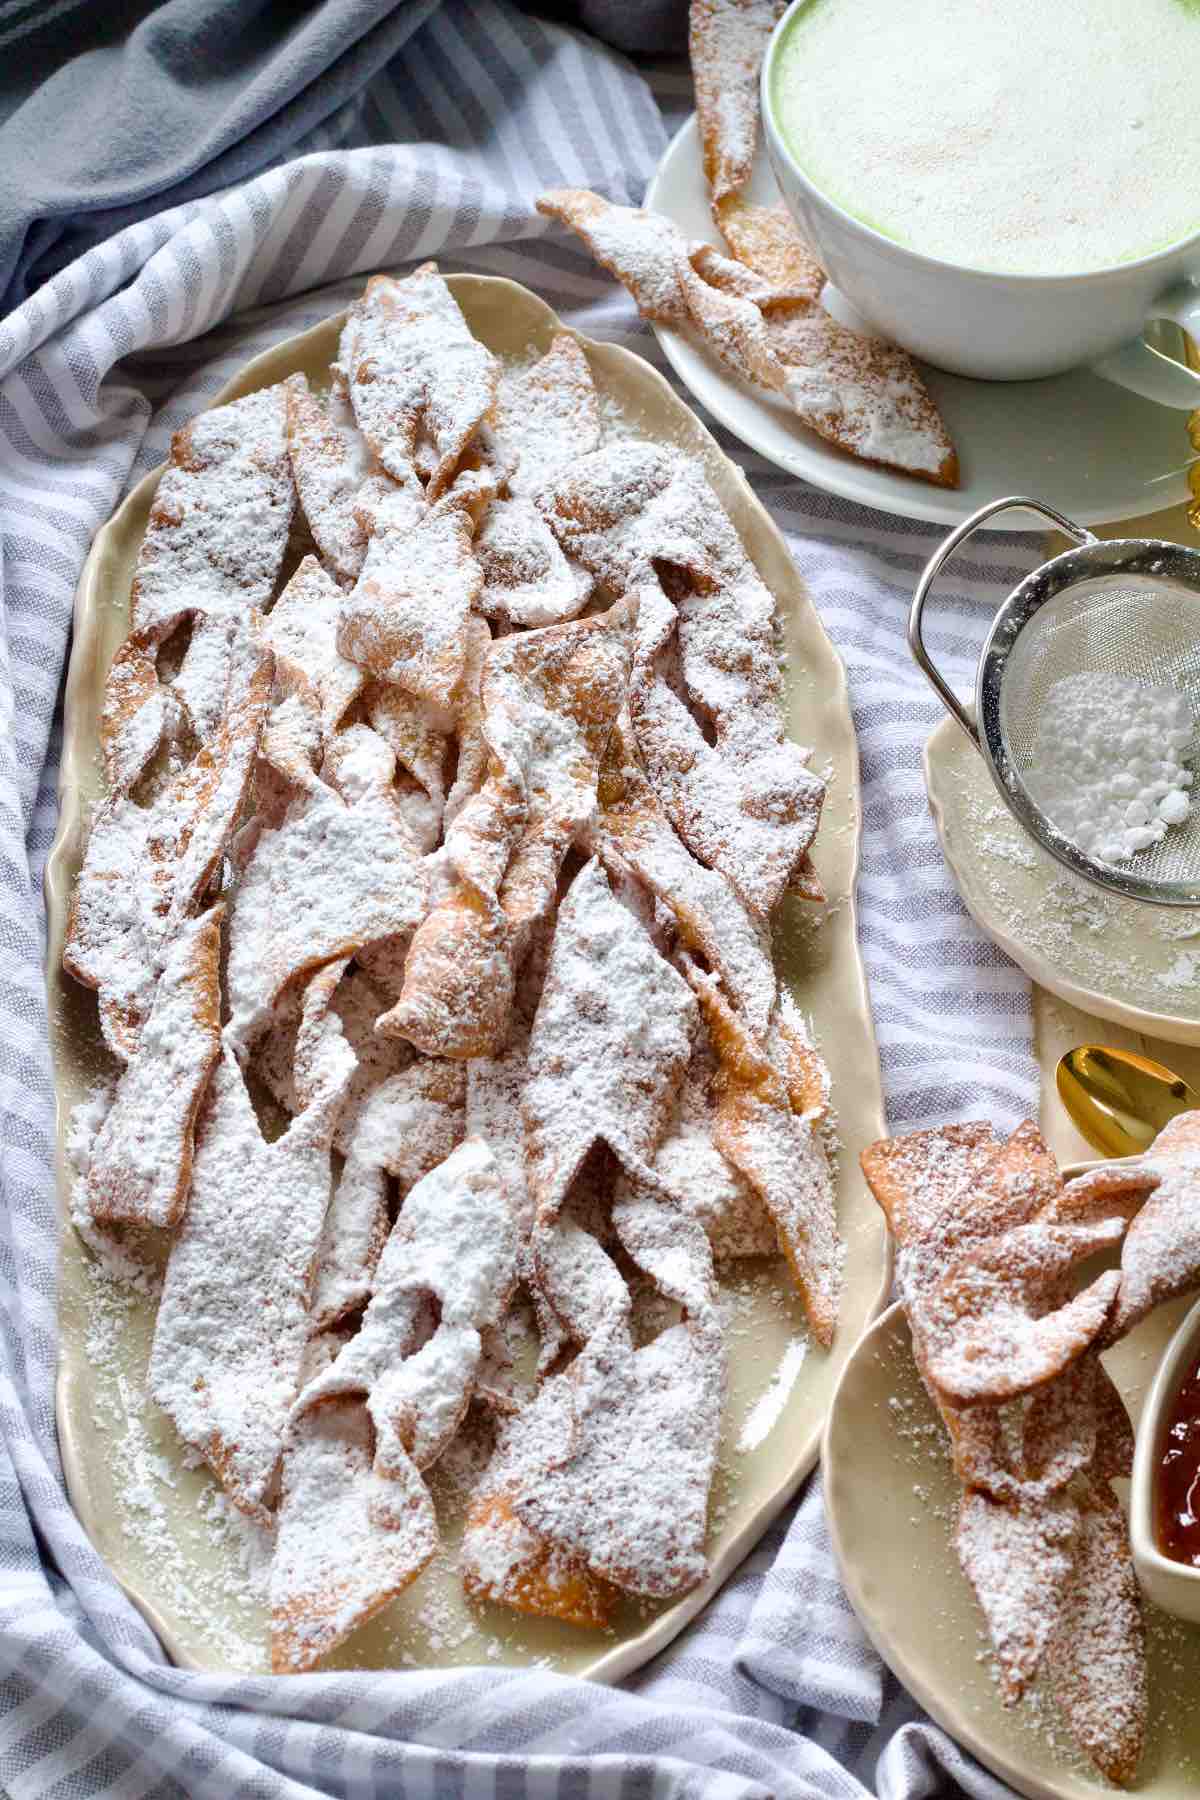 Icing sugar dusted chruściki on an oval shaped platter.